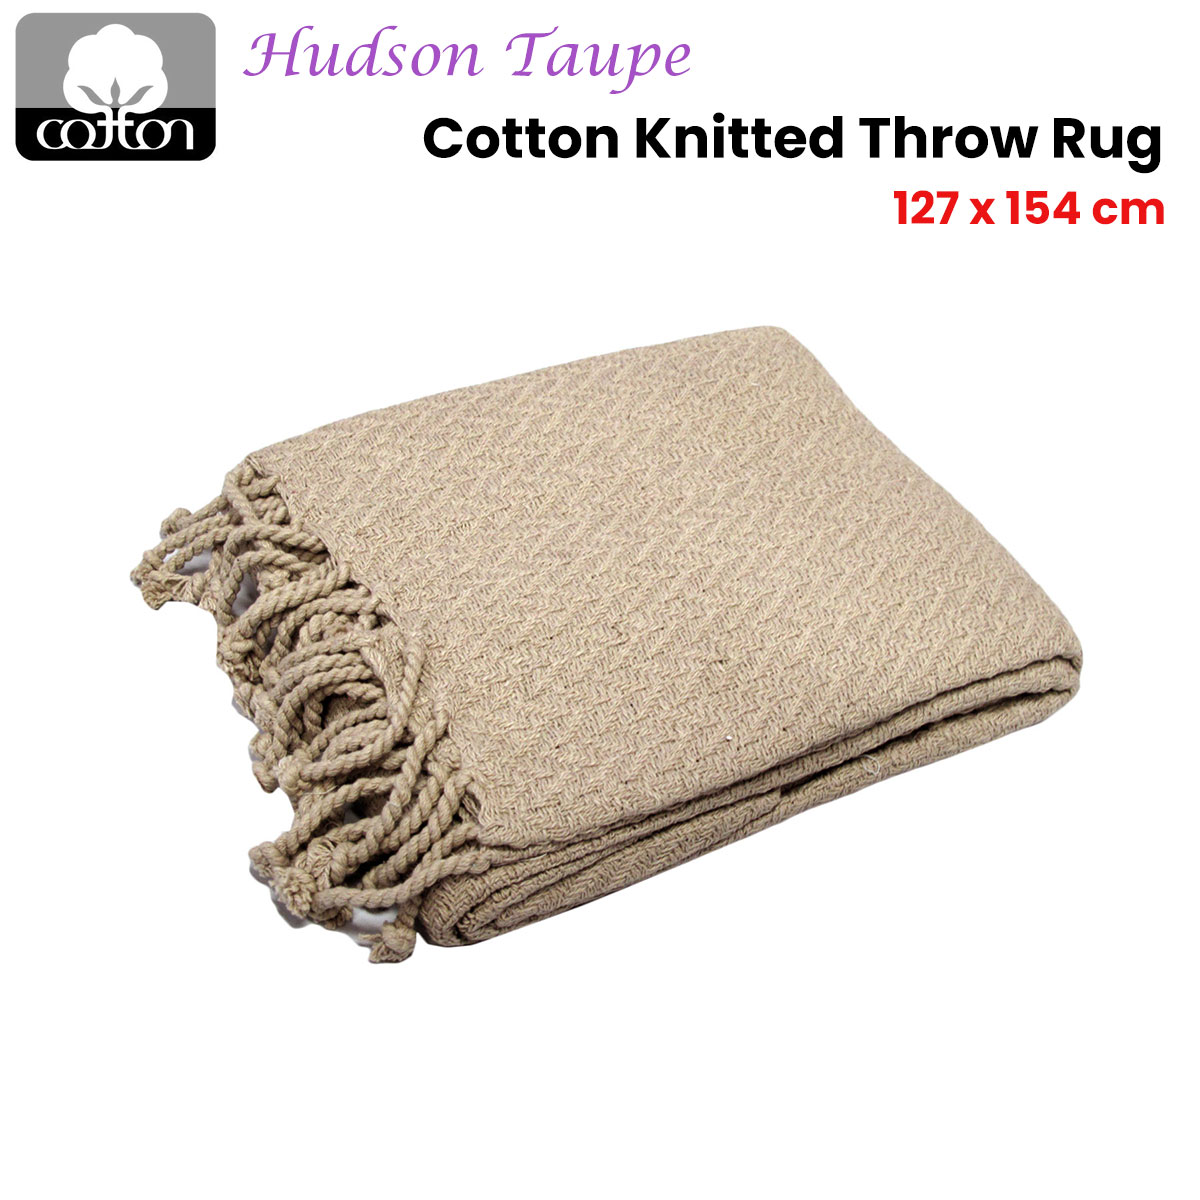 Hudson Taupe Cotton Knitted Throw Rug 127 x 154 cm